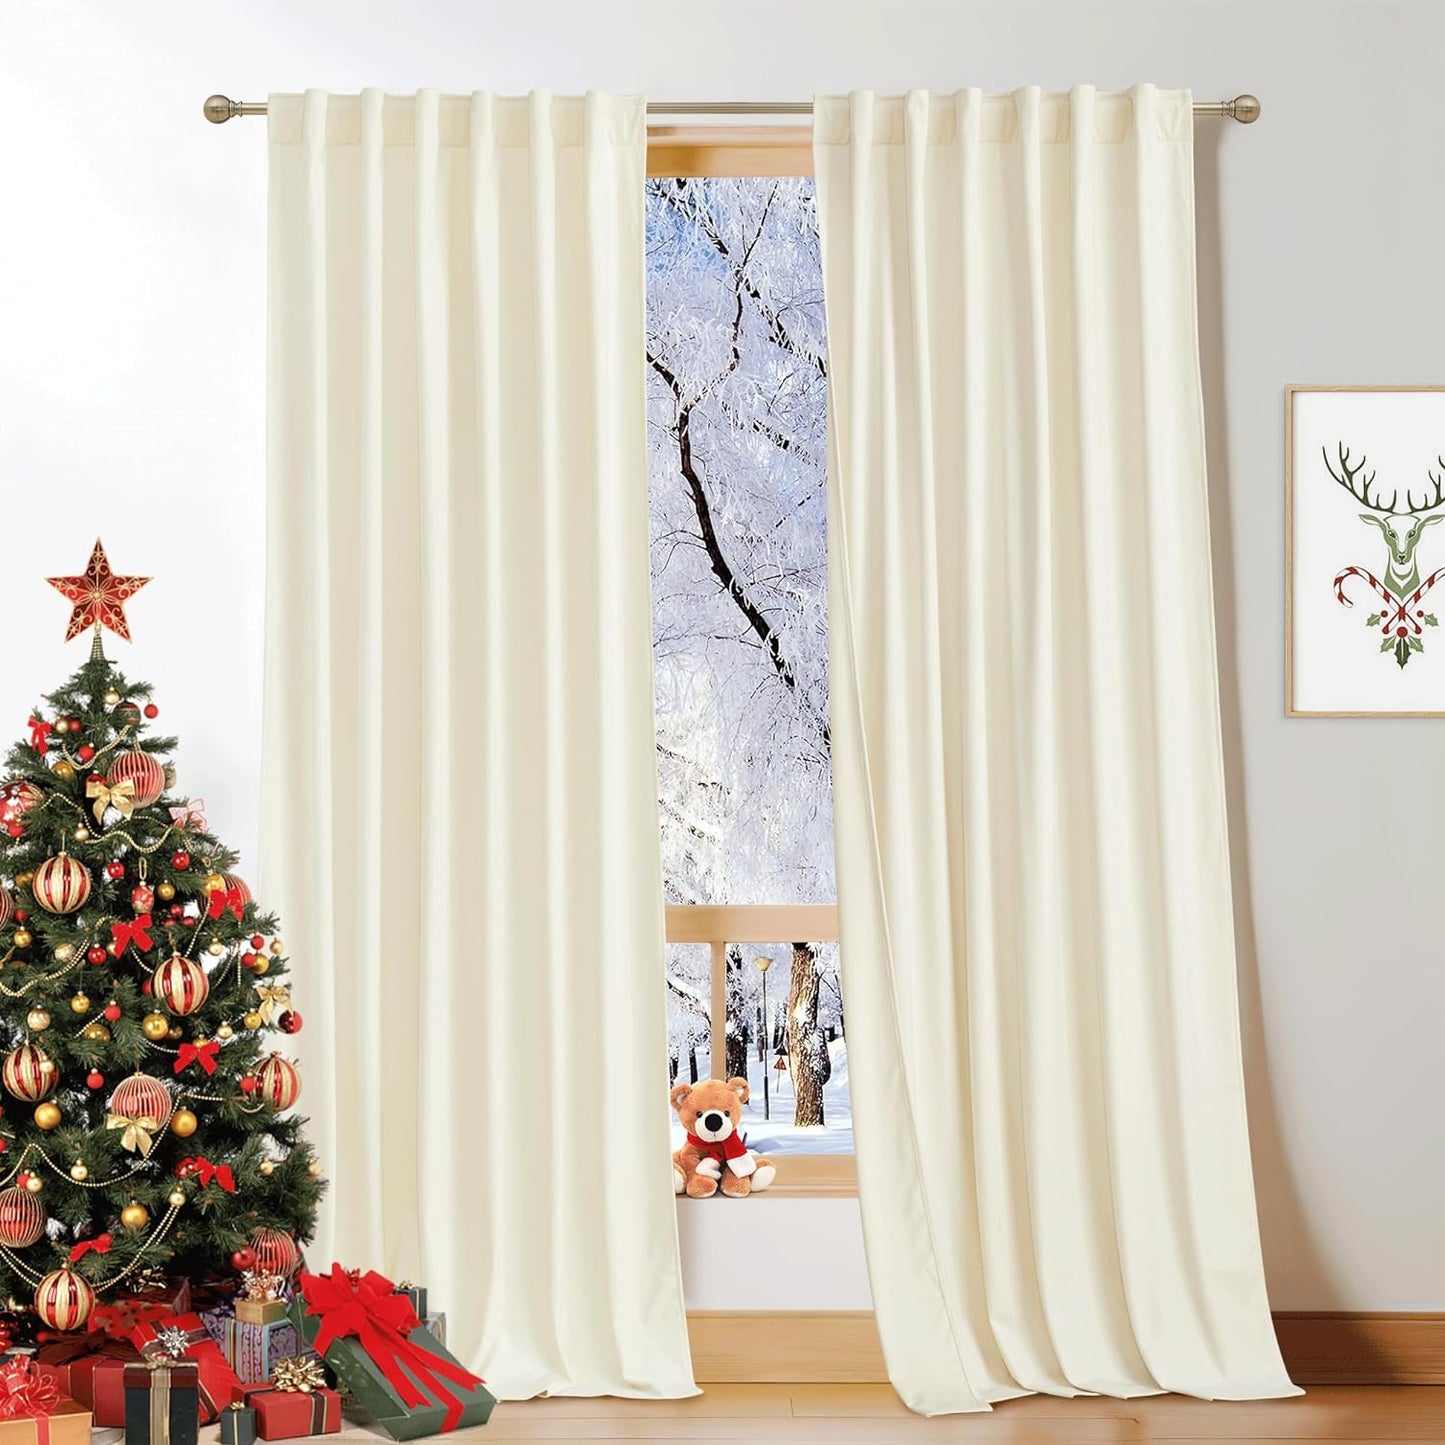 KGORGE Green Velvet Curtains 84 Inches Super Soft Room Darkening Thermal Insulating Window Curtains & Drapes for Bedroom Living Room Backdrop Holiday Christmas Decor, Hunter Green, W 52 X L 84, 2 Pcs  KGORGE Ivory W 52 X L 96 